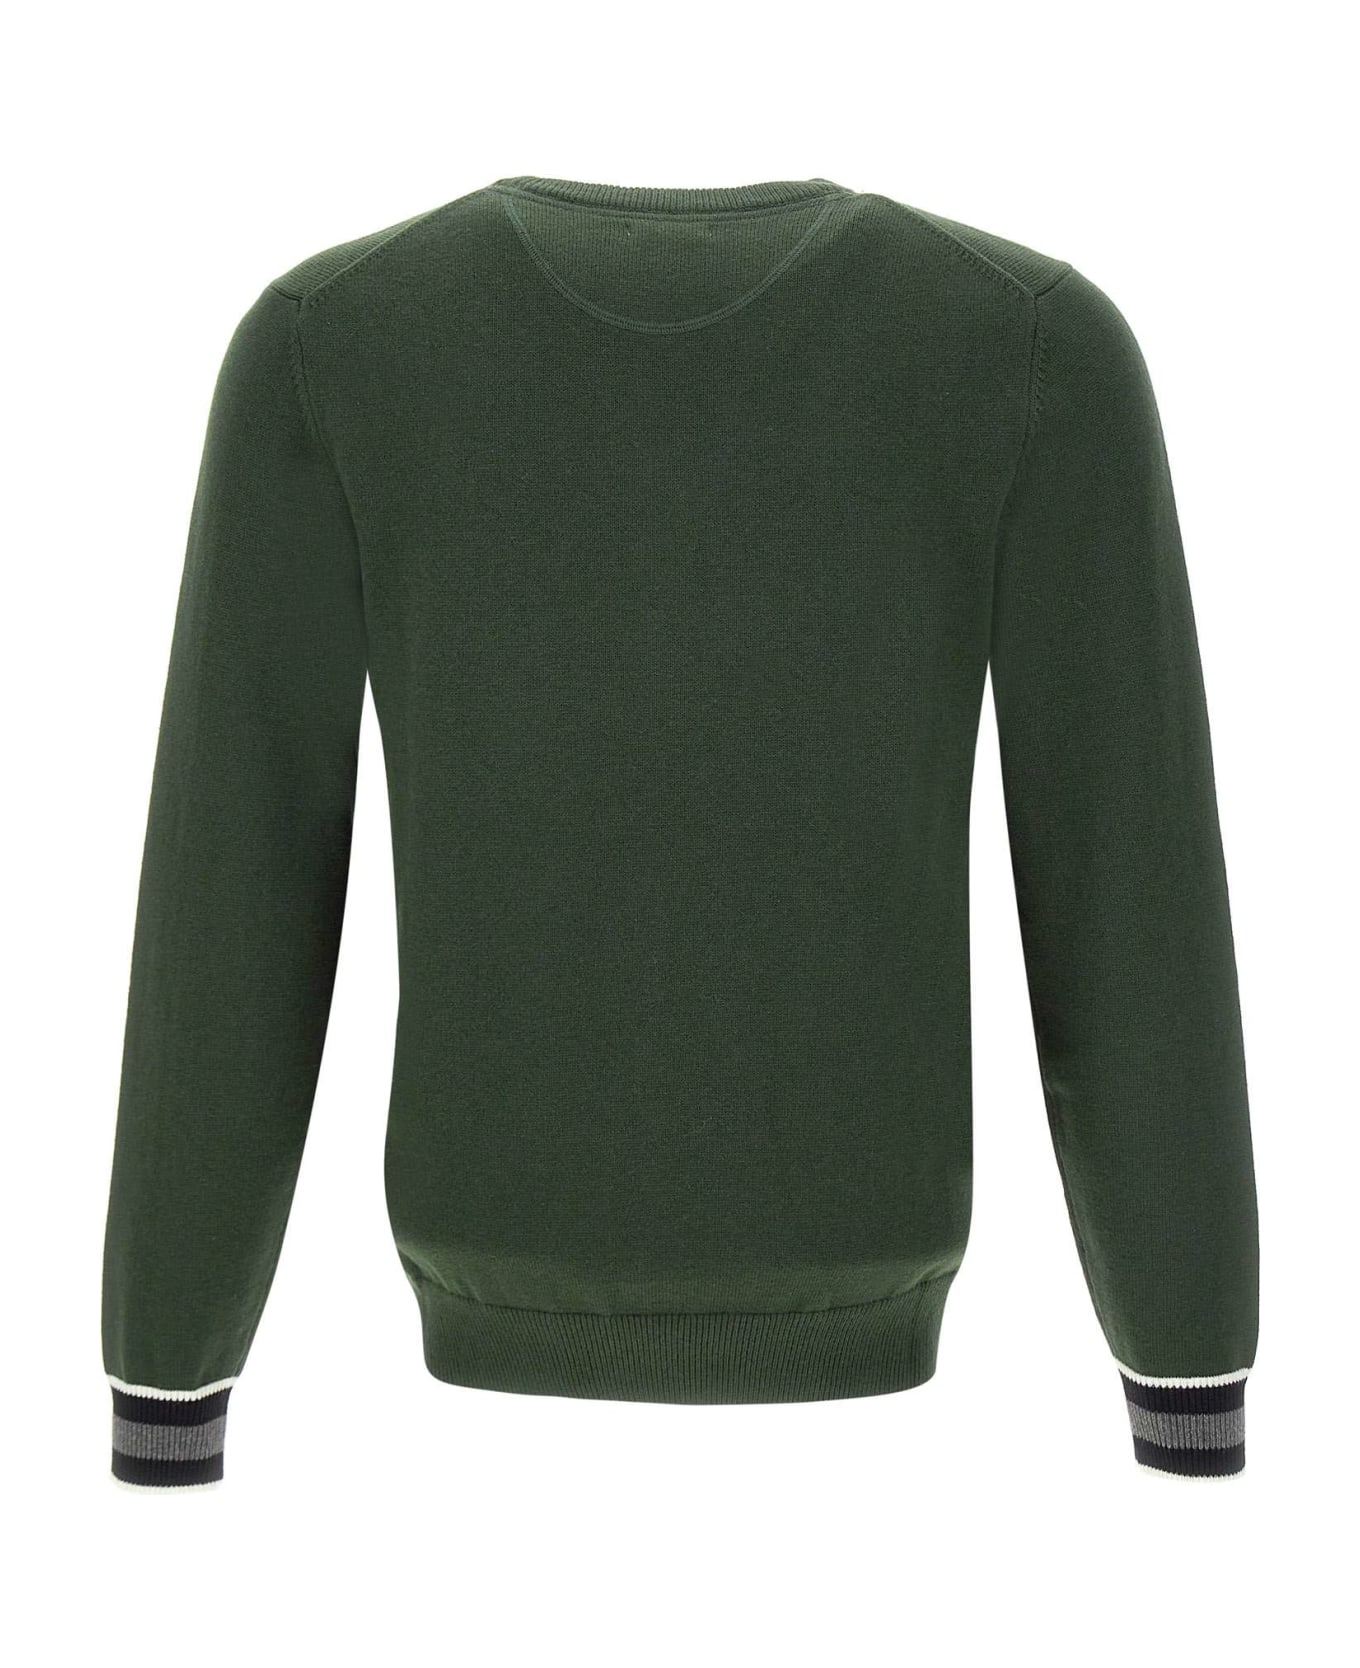 Sun 68 Wool And Cotton Sweater Sweater - MILITARE